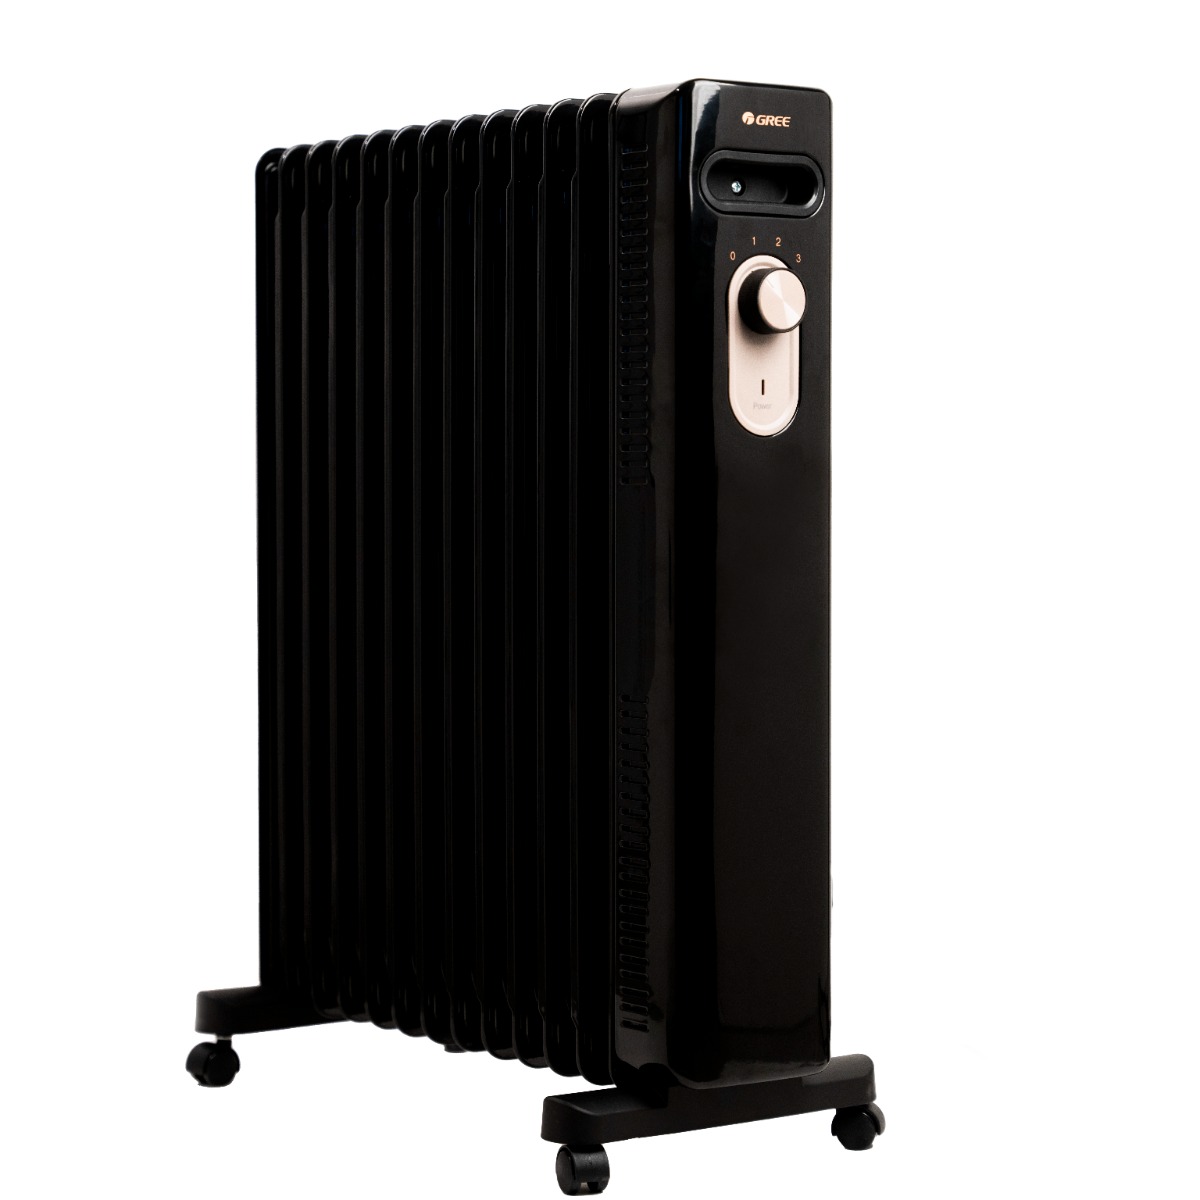 GREE Oil Heater 13 Fins, 2200W, Temperature Control Options, Black  - NDYWK22-22-13